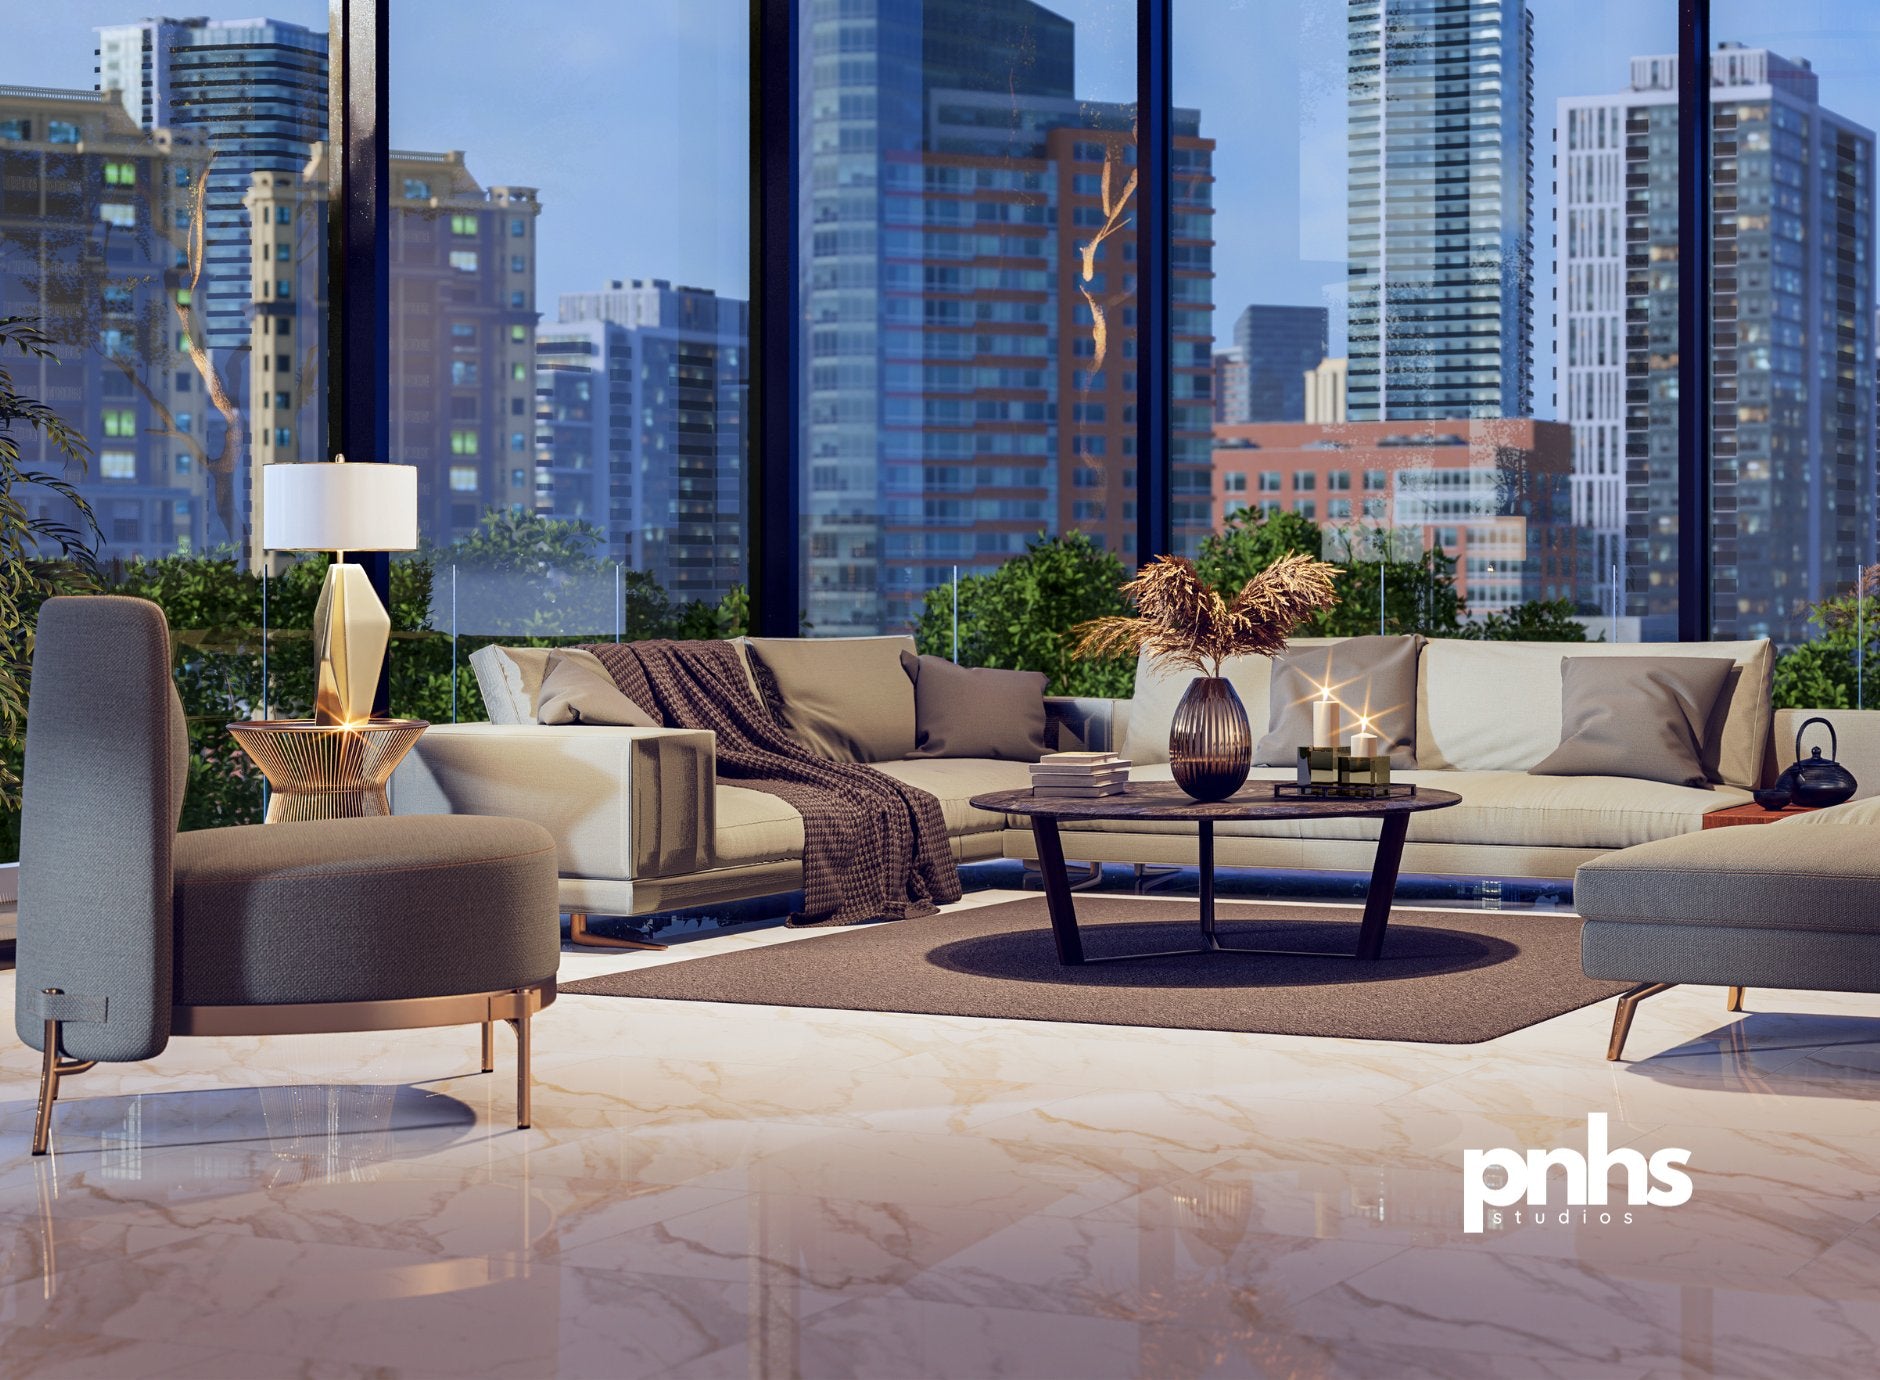 Experience modern furnishings for luxurious interiors at Penthouse Interiors.